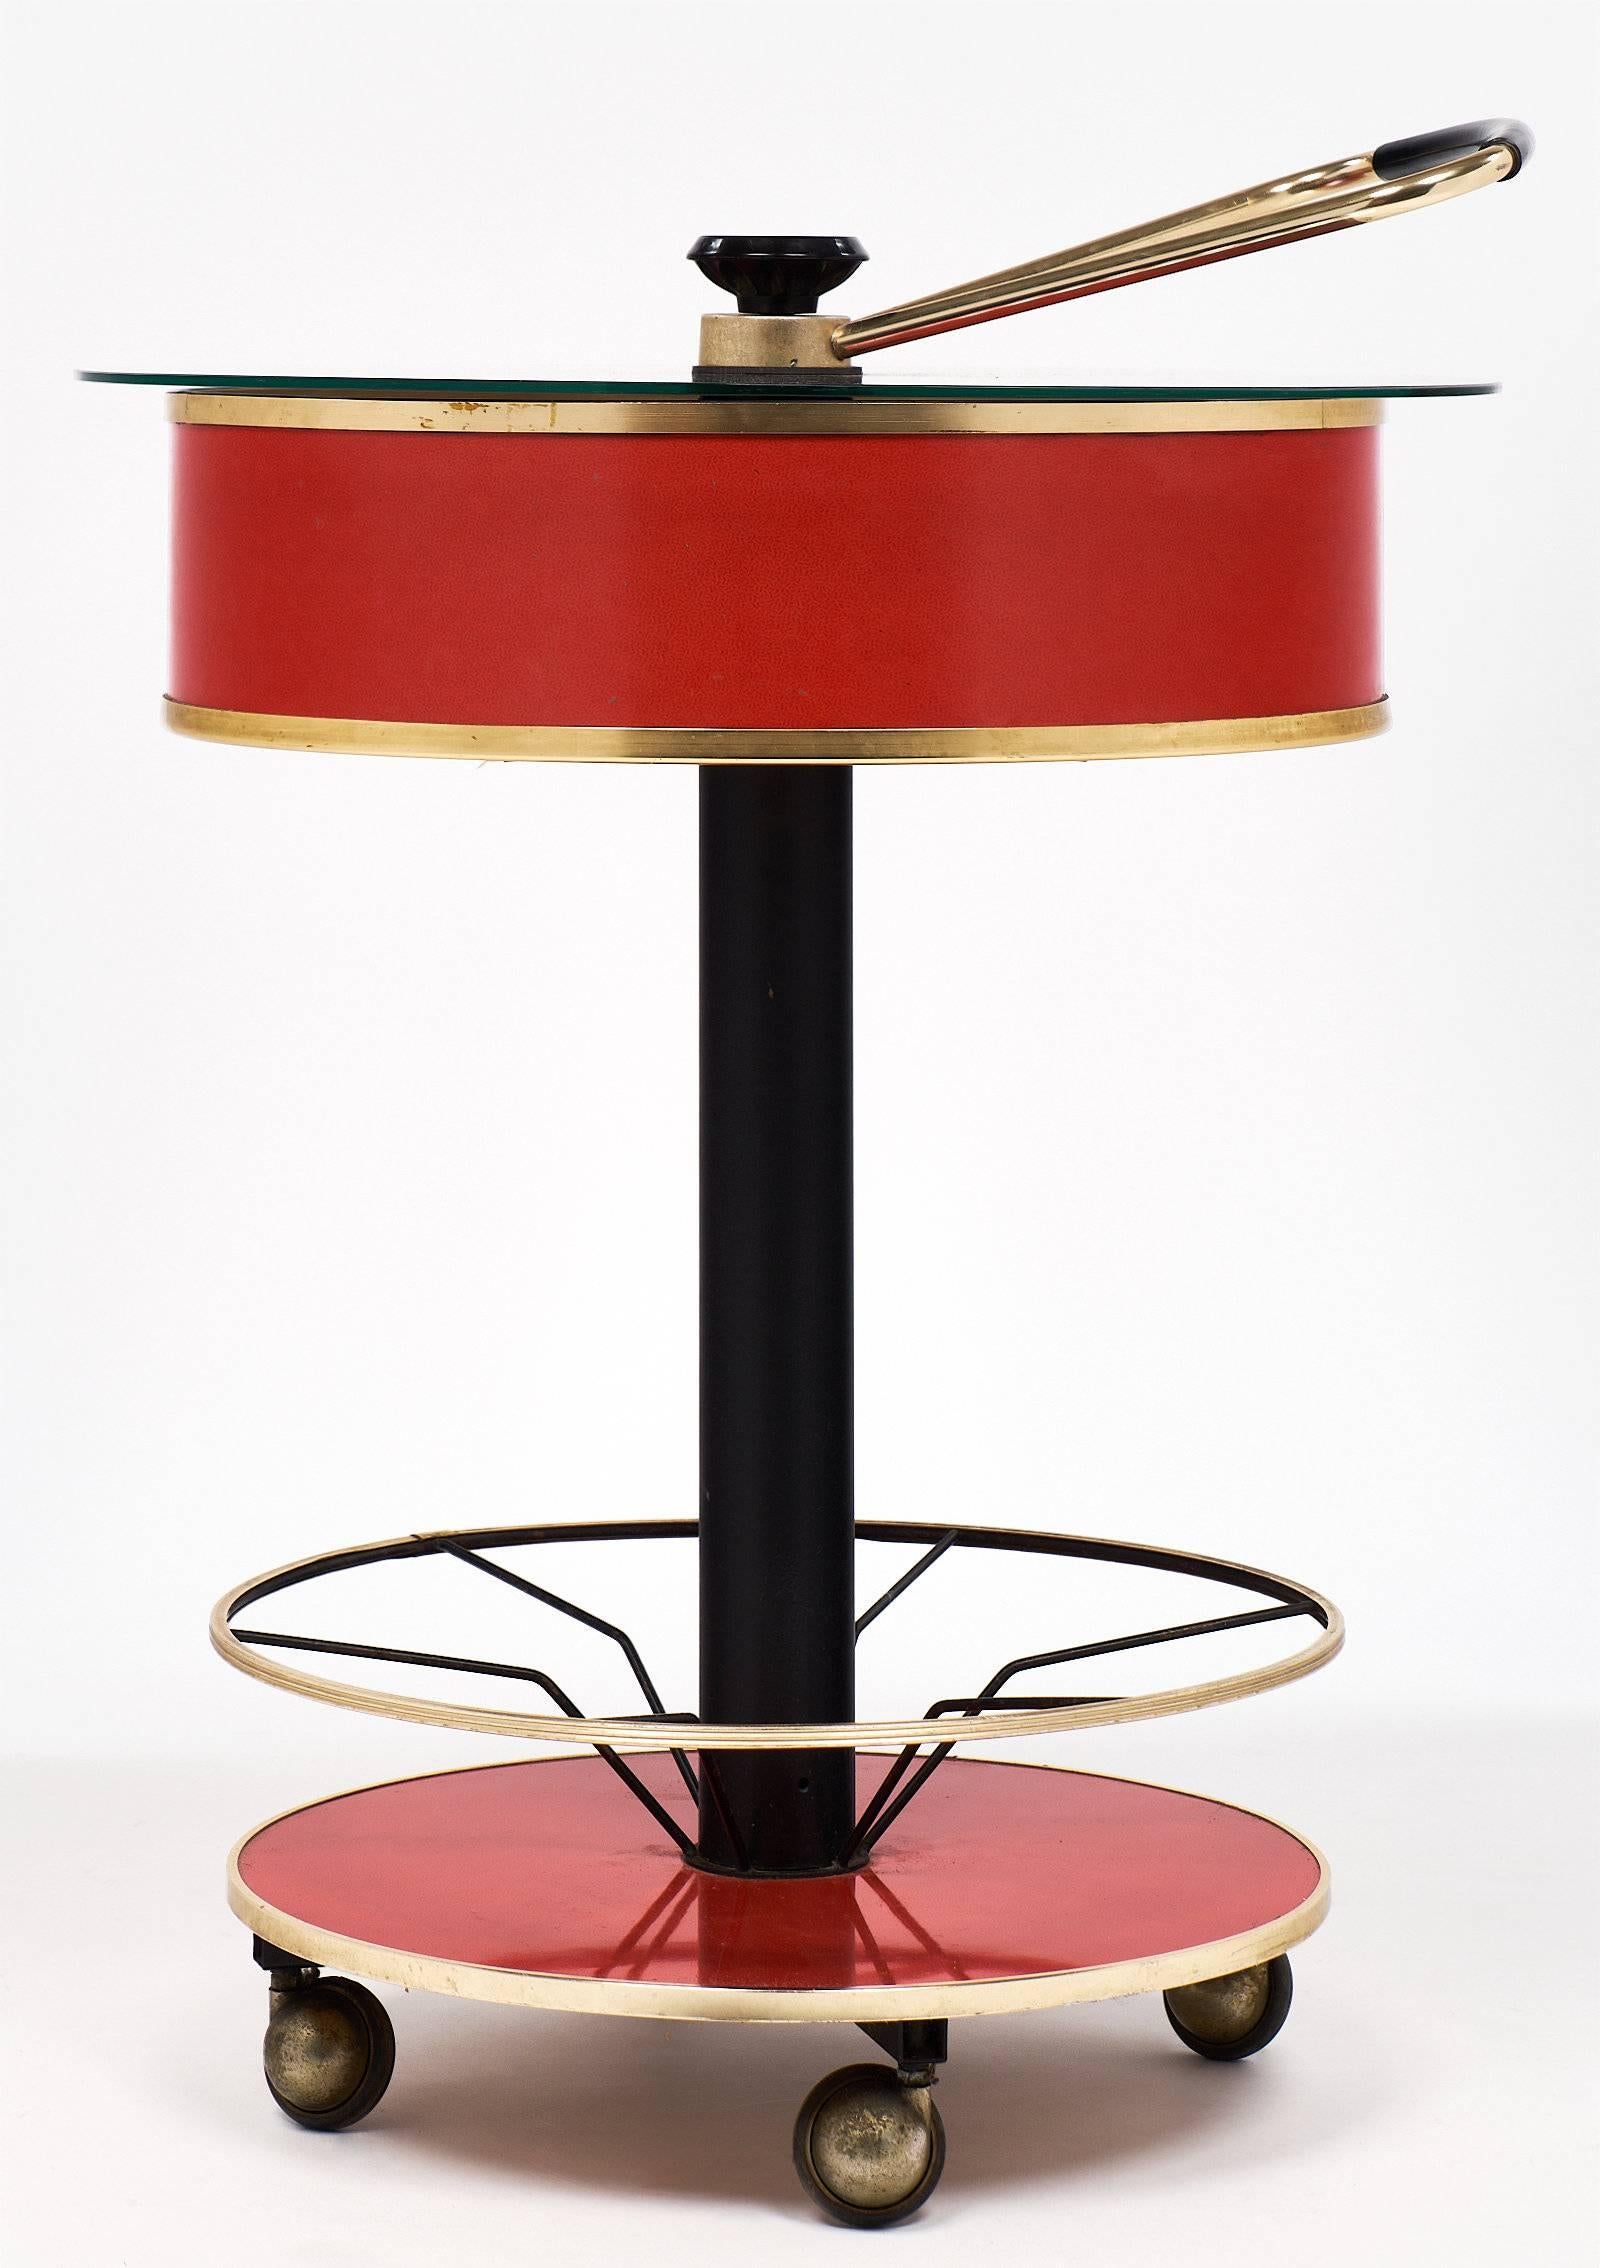 A circular bar cart with whimsical features such as a central leg and a hydraulic system for opening the case using the brass handle. At the raised position, the glass top lifts allowing access for glasses to be stored in the space within. Bottles